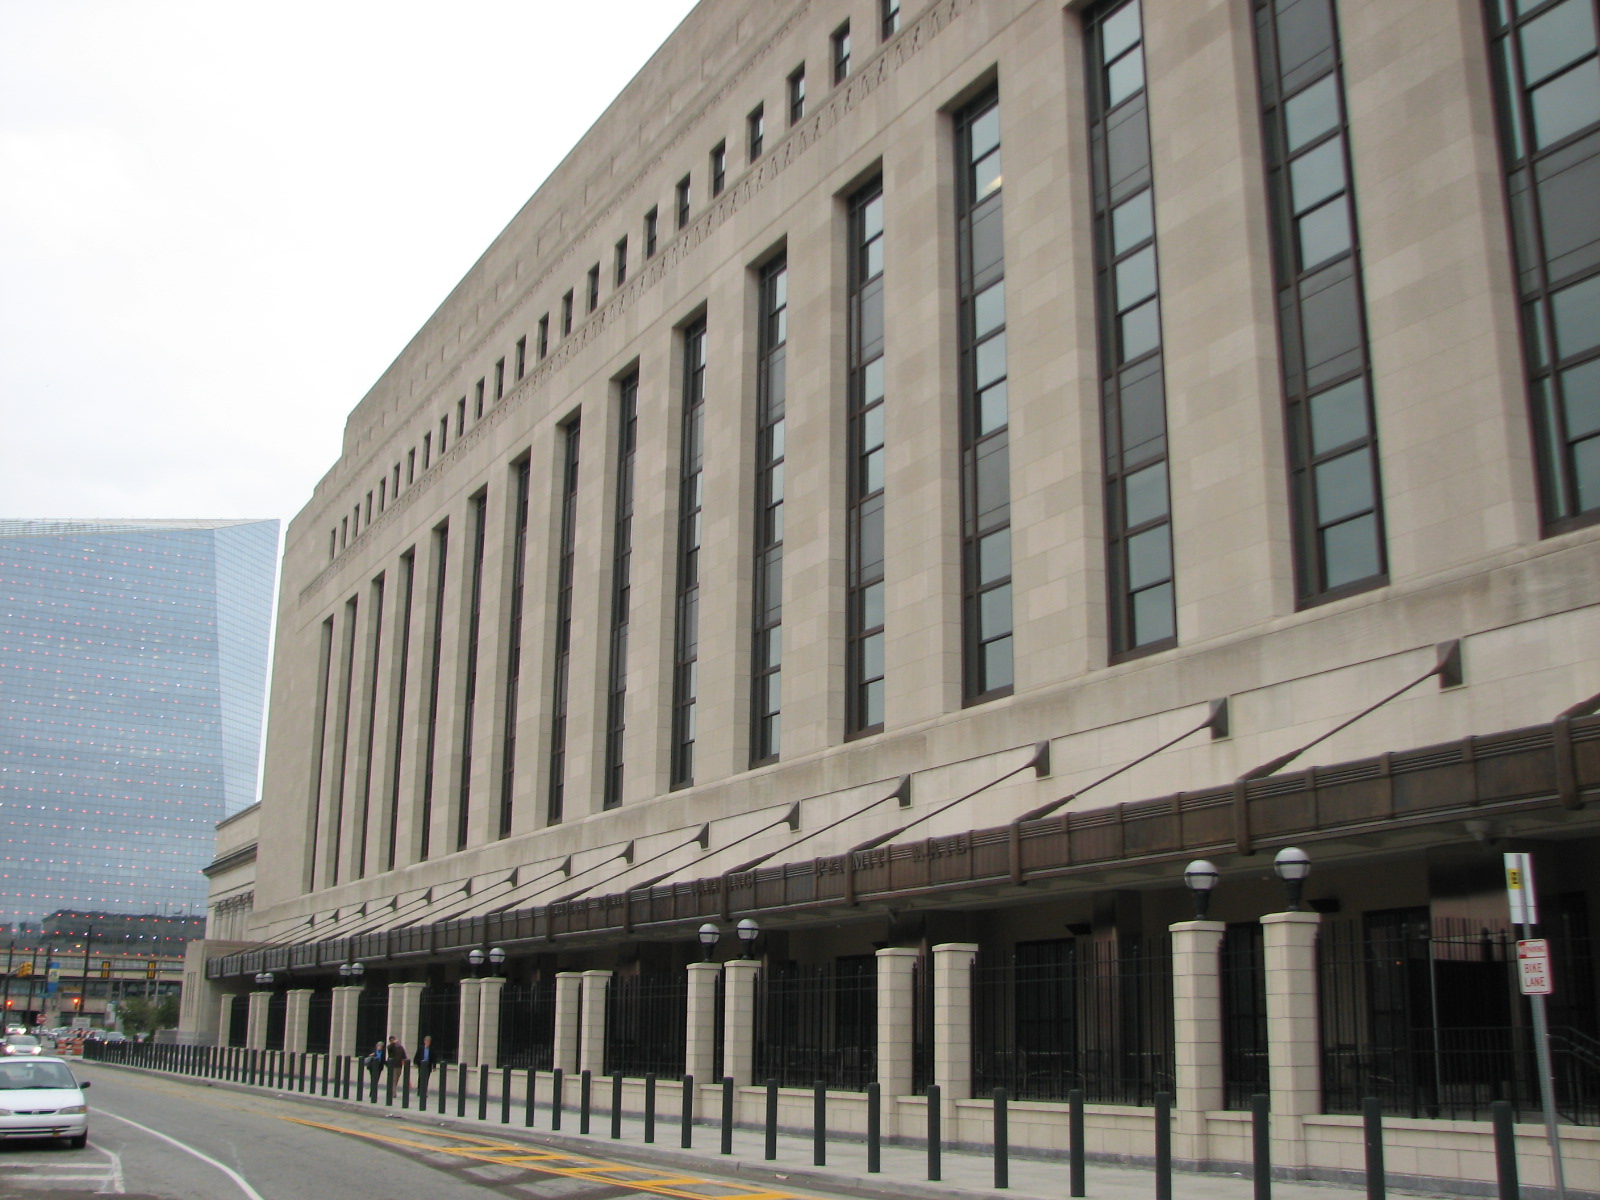 The west side of the building, which once received mail truck deliveries, now has terraces for the building’s employees.